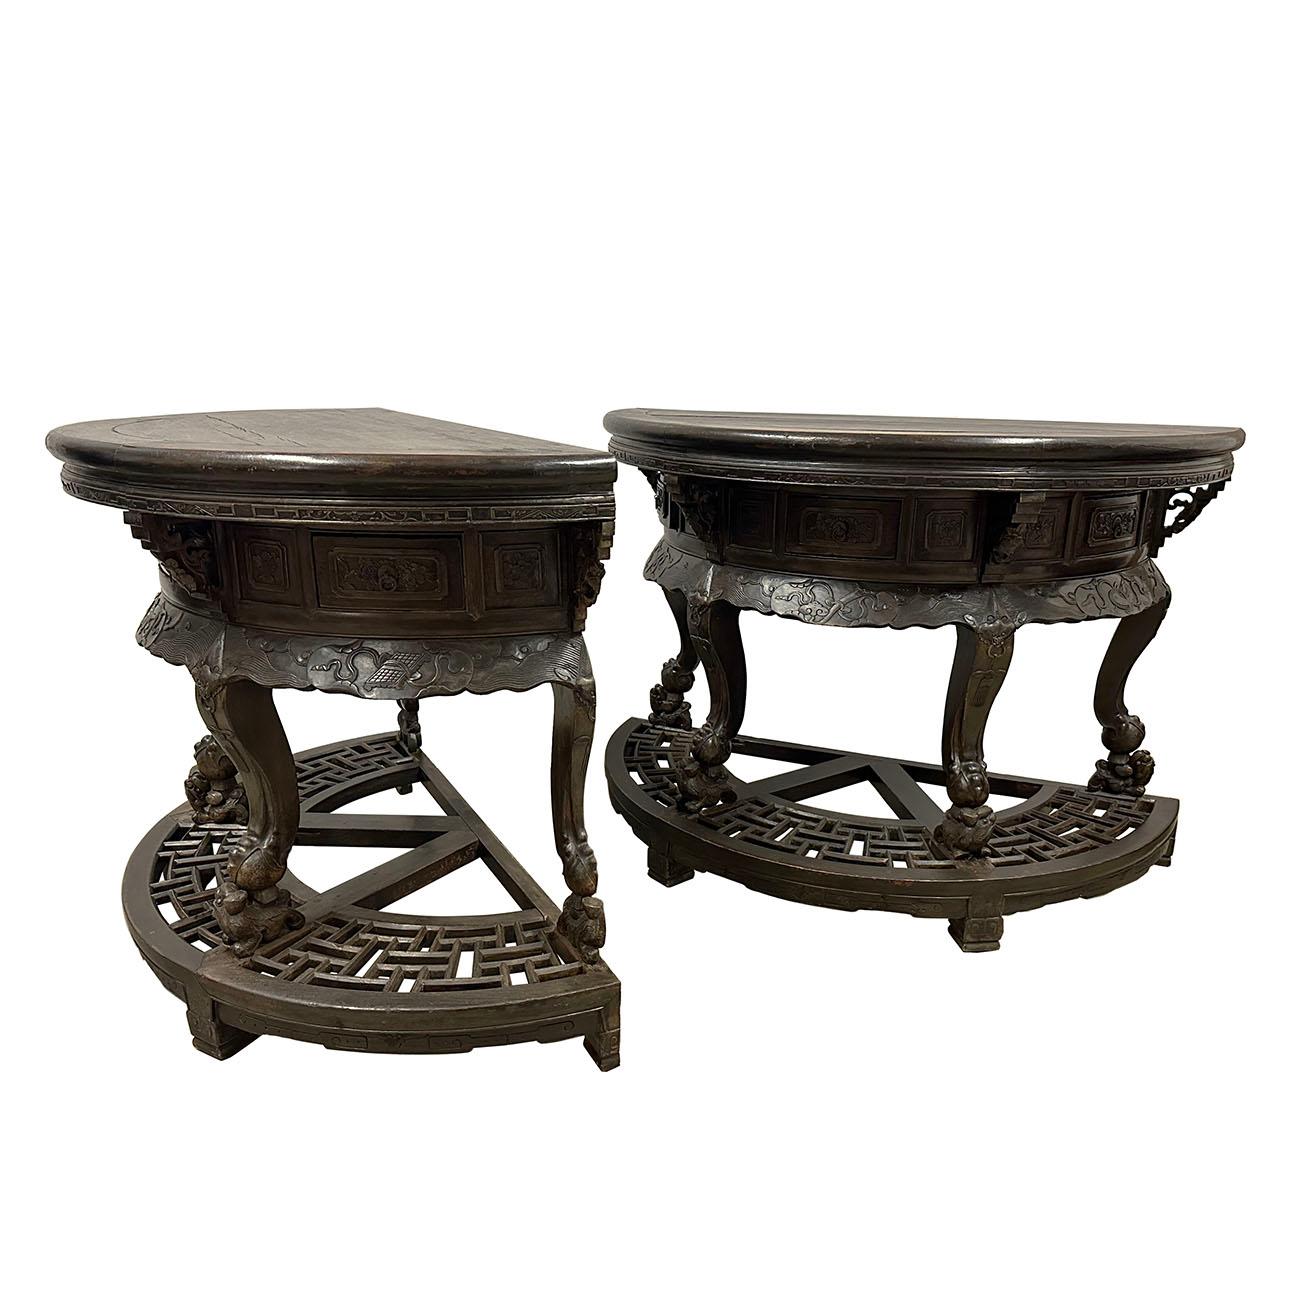 This gorgeous pair of Chinese antique carved half moon tables are made from solid wood with beautiful traditional carving works of bats and hidden eight immortals design around table, meaning lucky and longevity. This tables has intricate carving